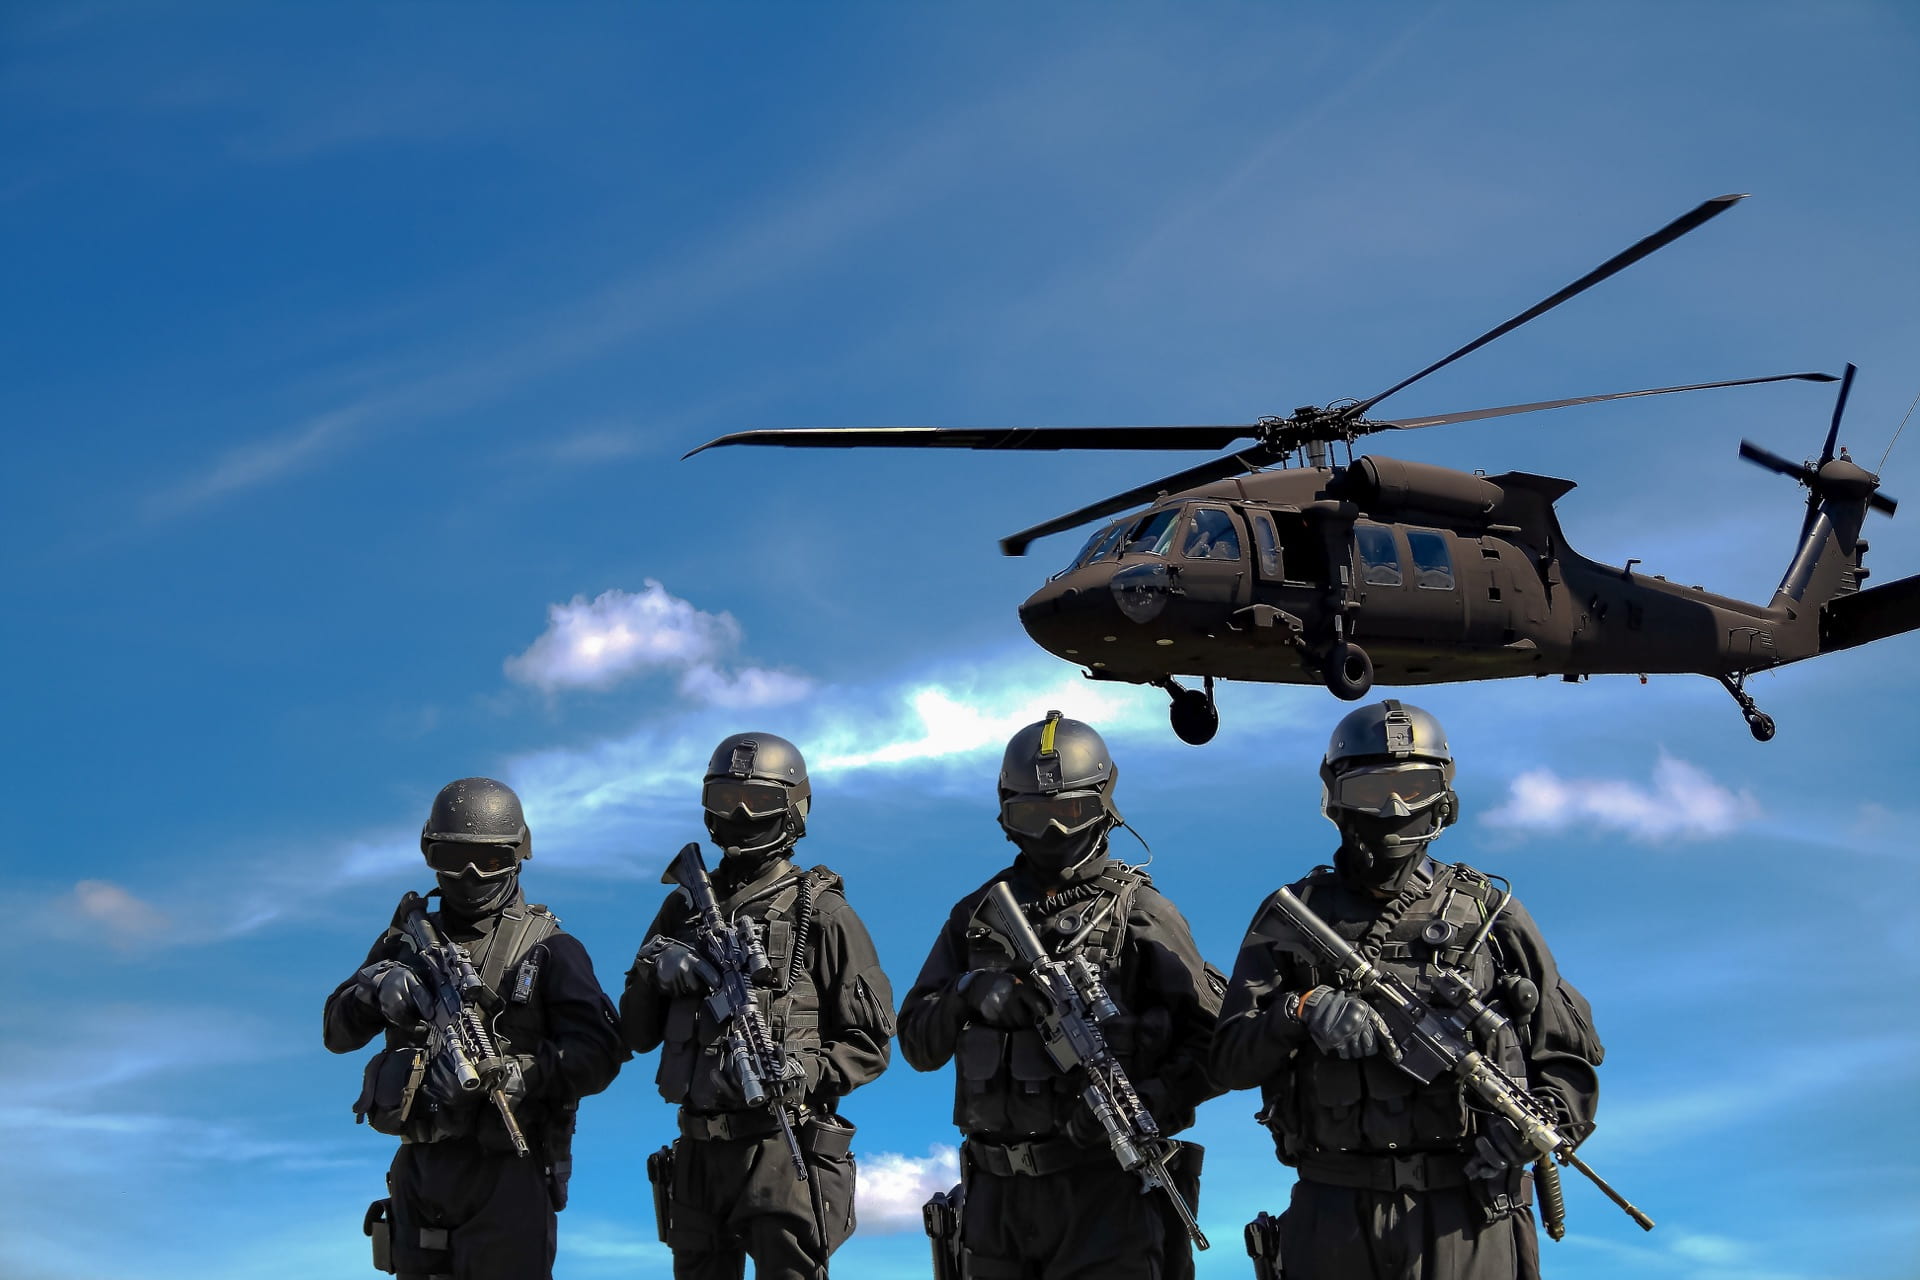  Four soldiers side by side in front of a low-flying helicopter.